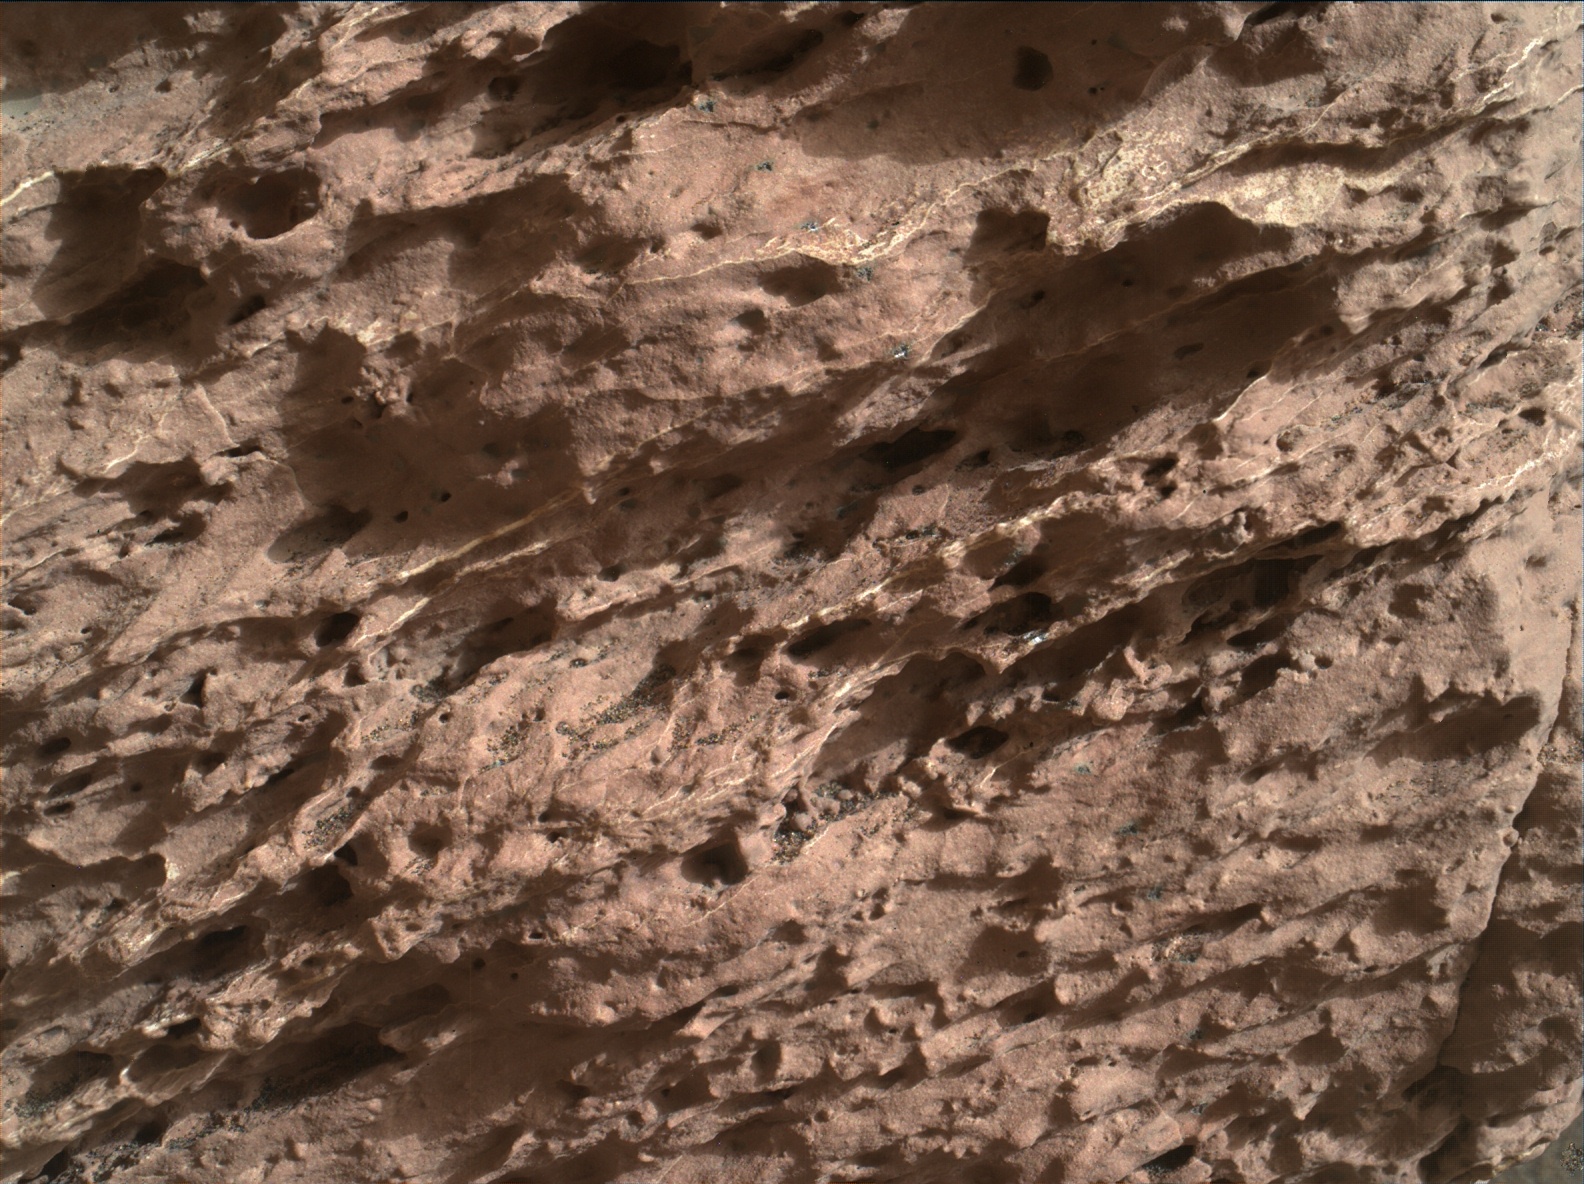 Nasa's Mars rover Curiosity acquired this image using its Mars Hand Lens Imager (MAHLI) on Sol 1582